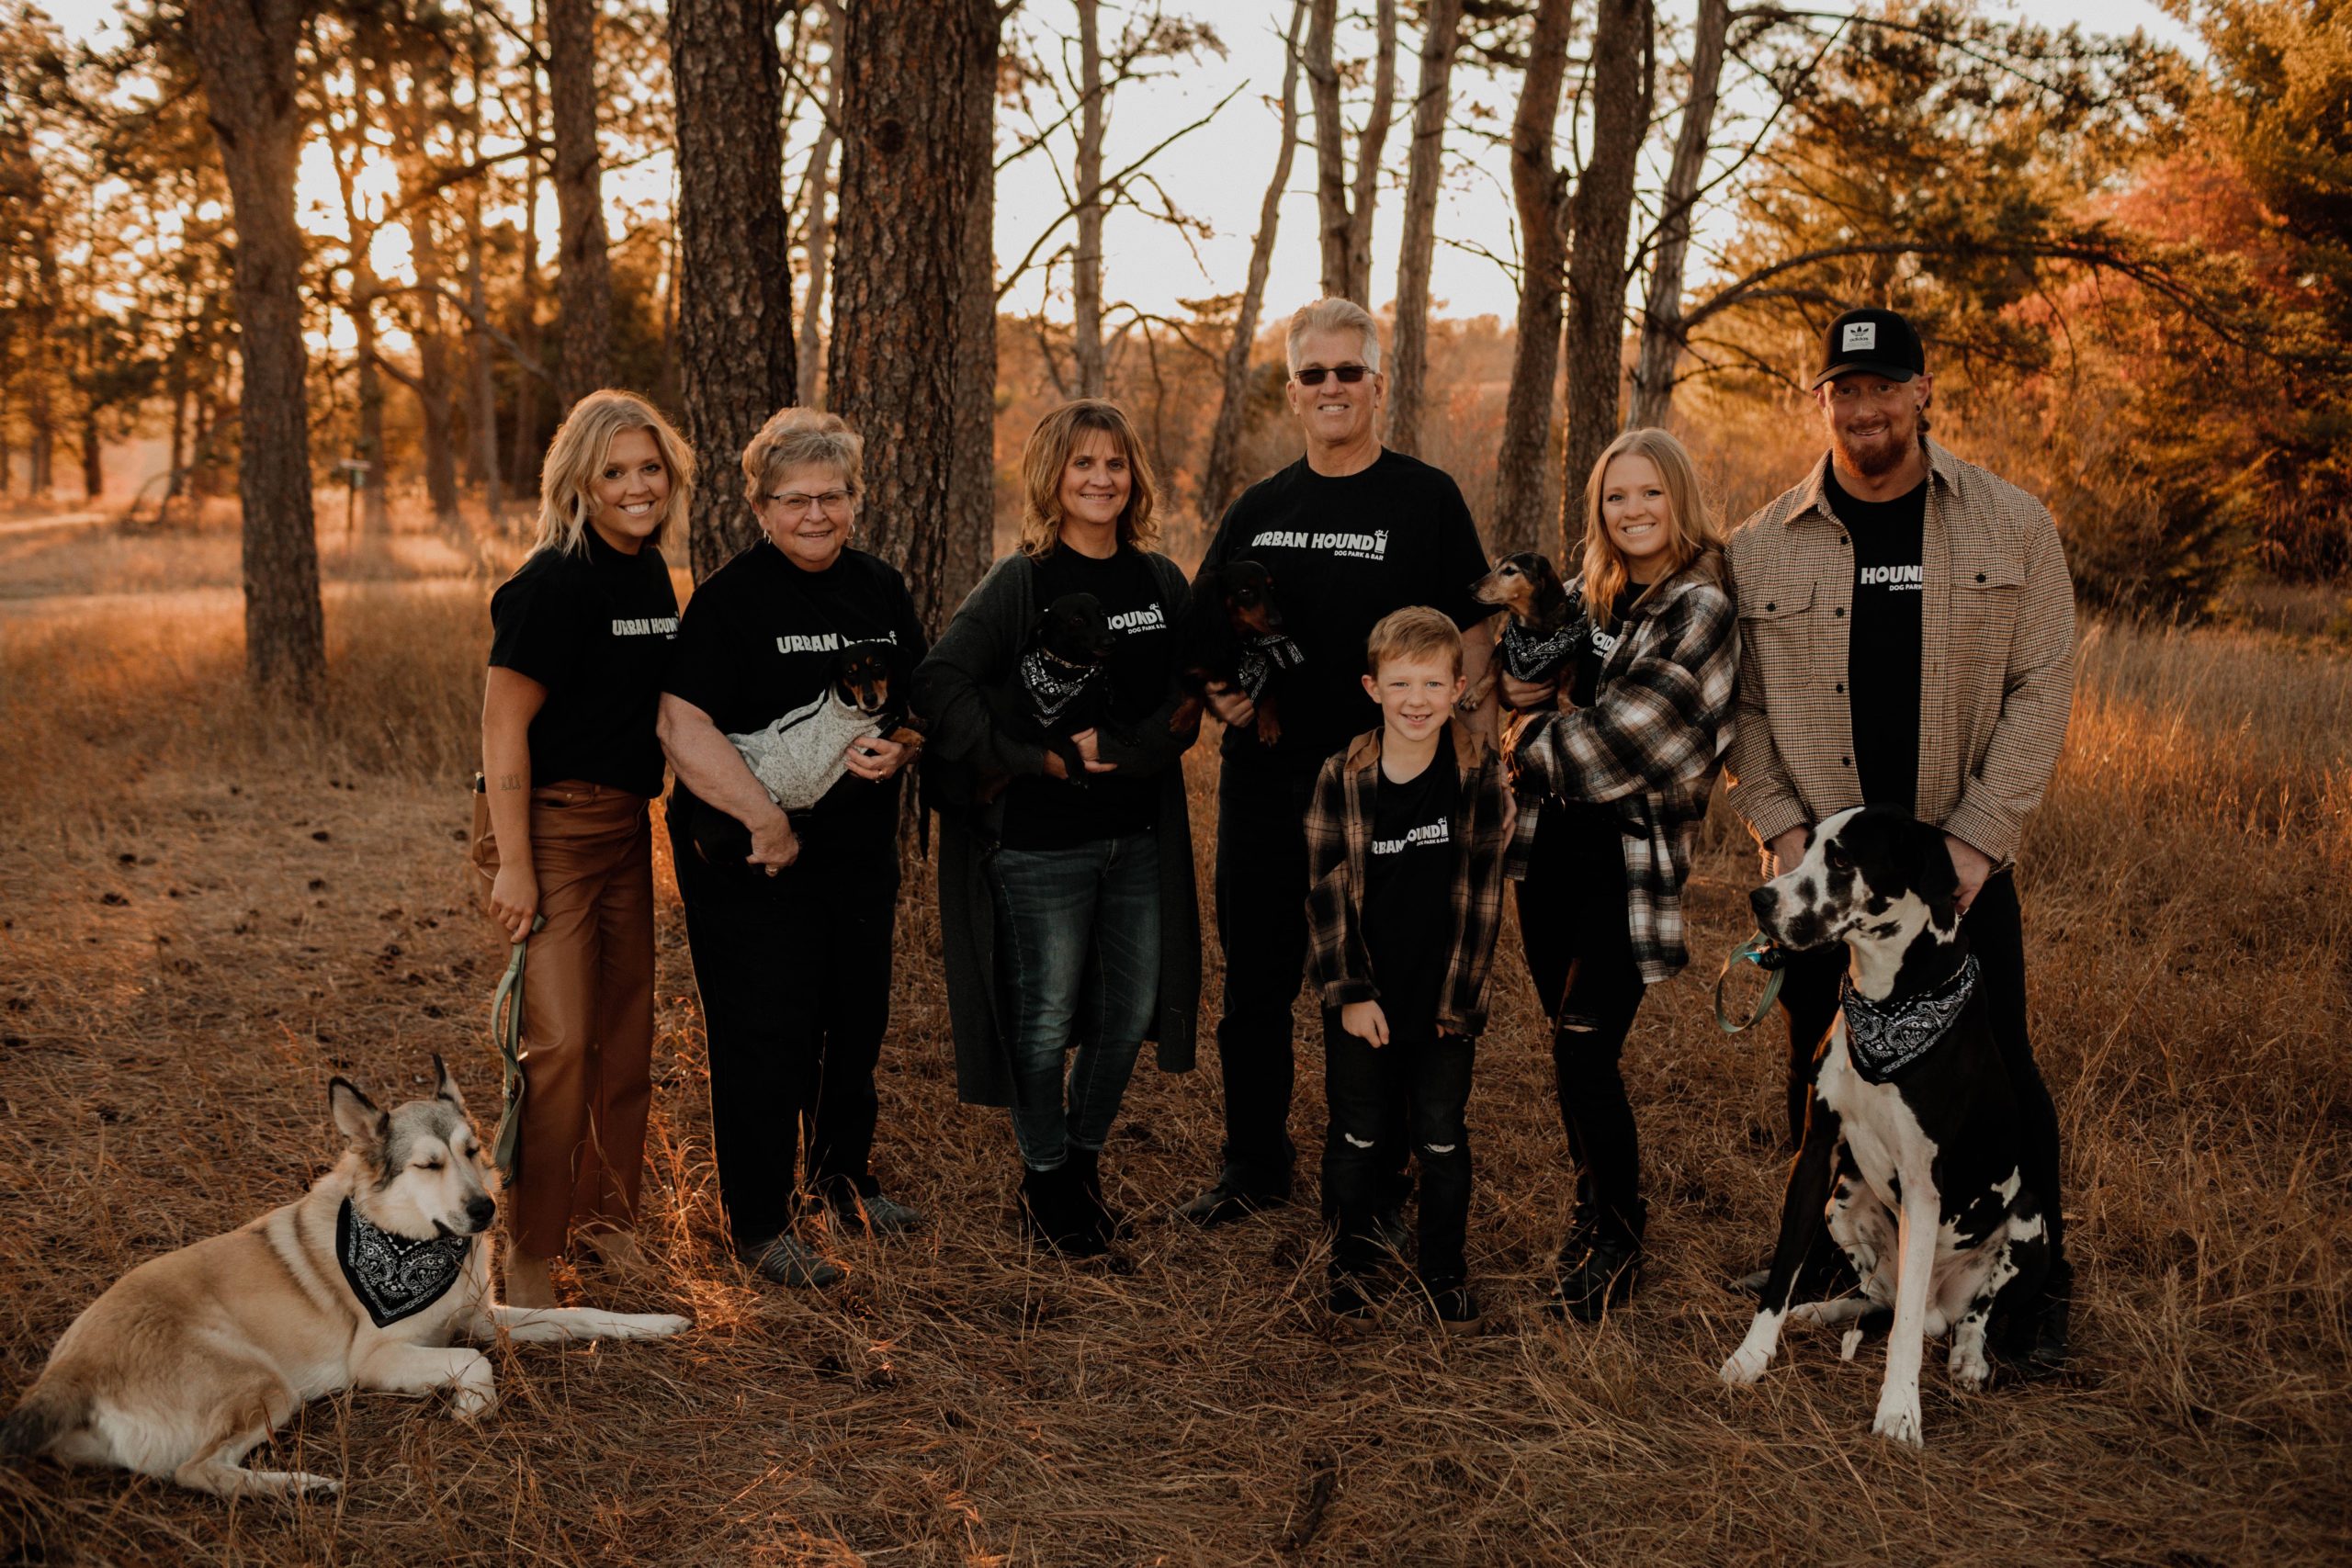 Meet the owners of Urban Hound Dog Park & Bar Lincoln, NE